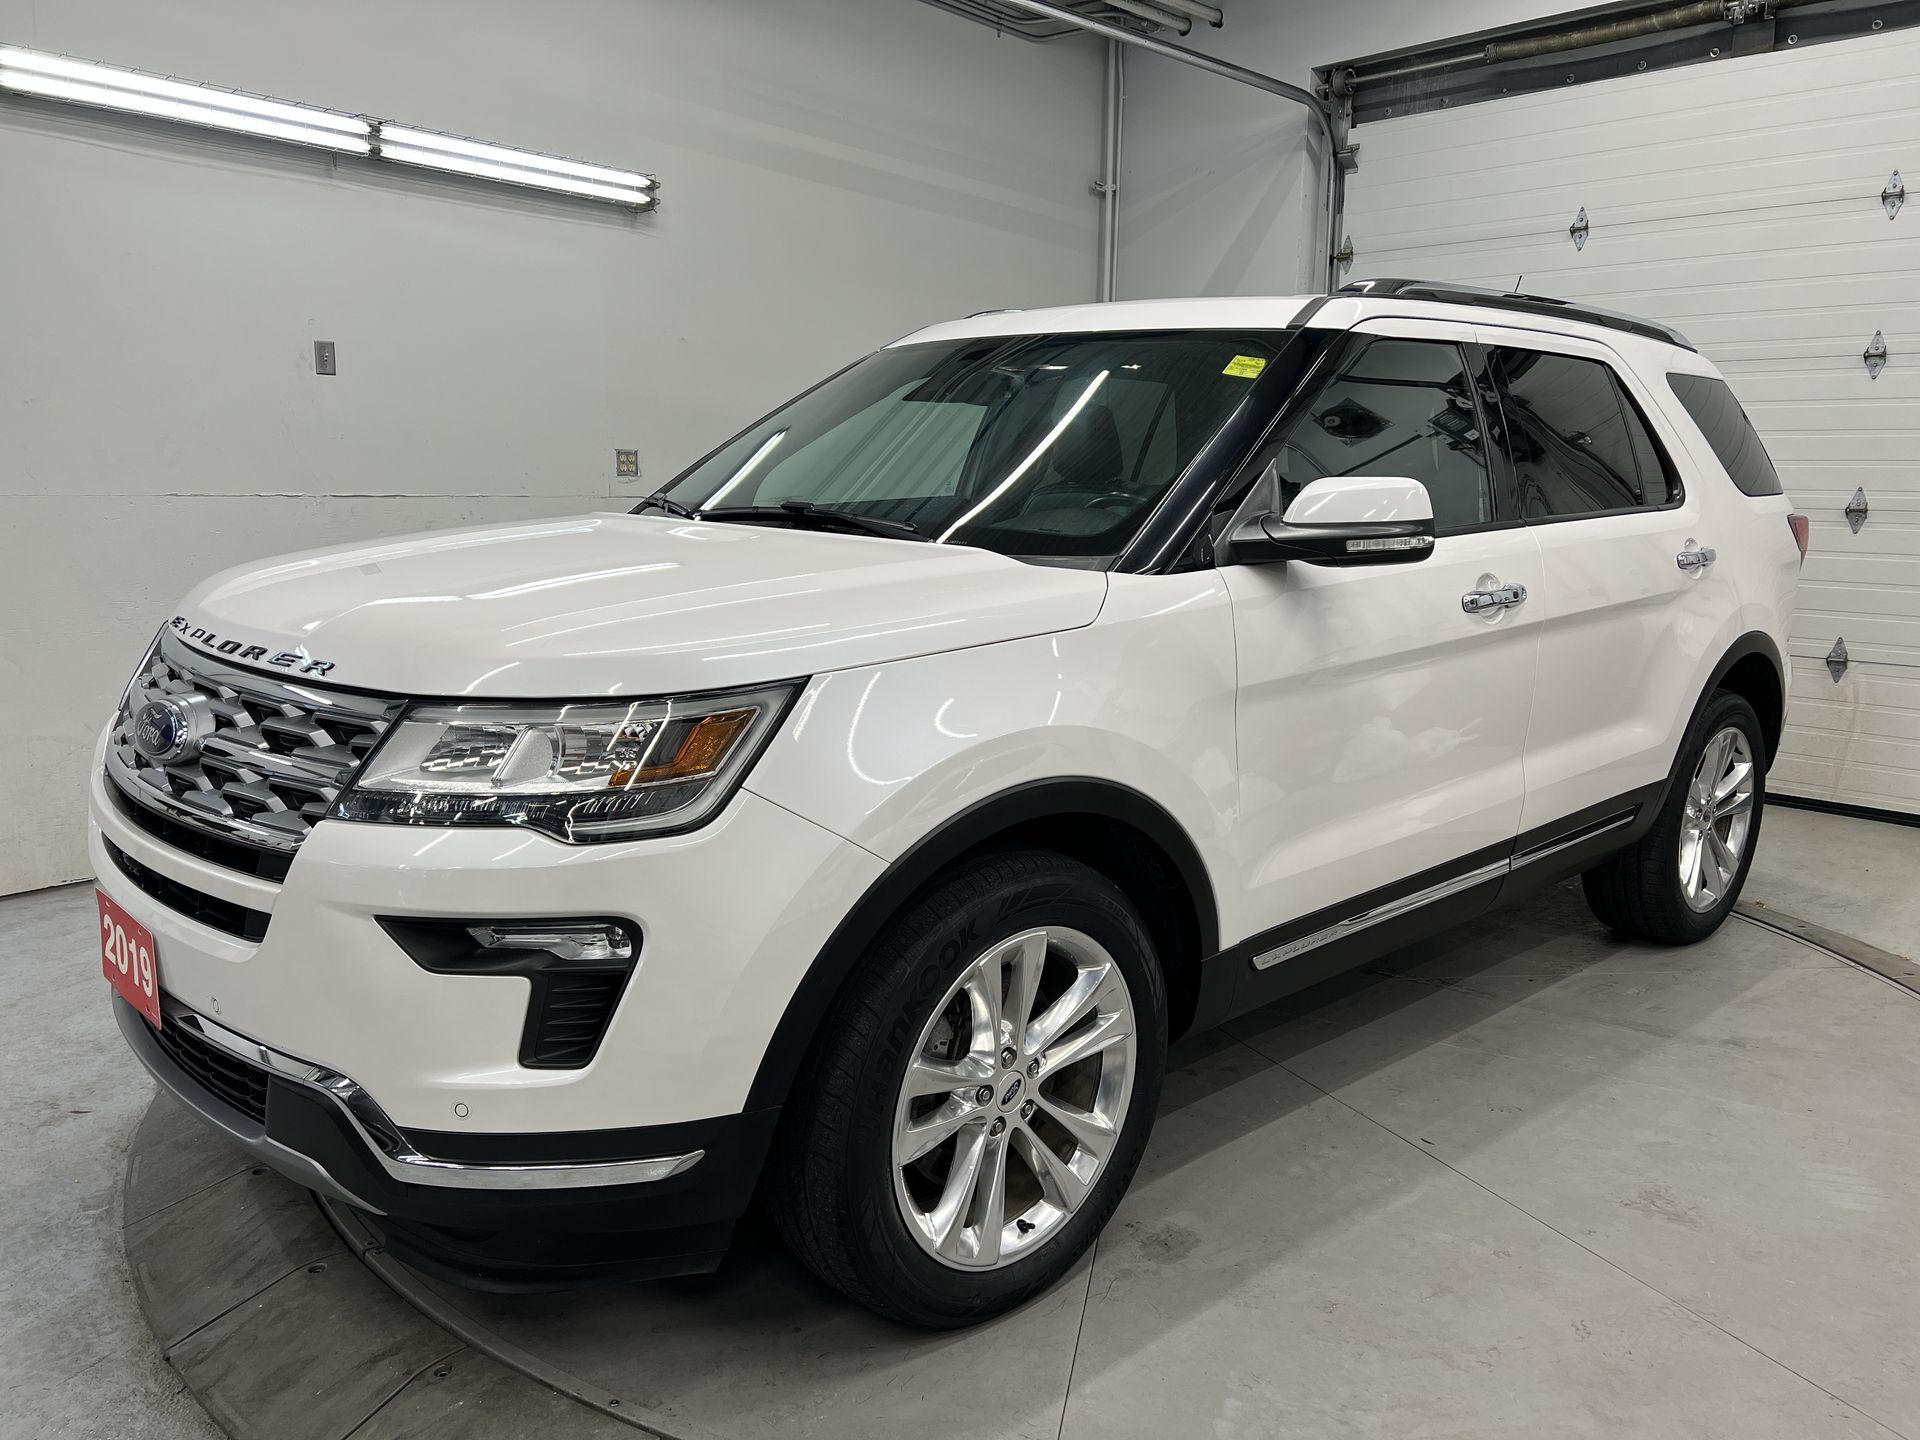 2019 Ford Explorer LIMITED| 7 PASS| COOLED LEATHER| DUAL SUNROOF| NAV